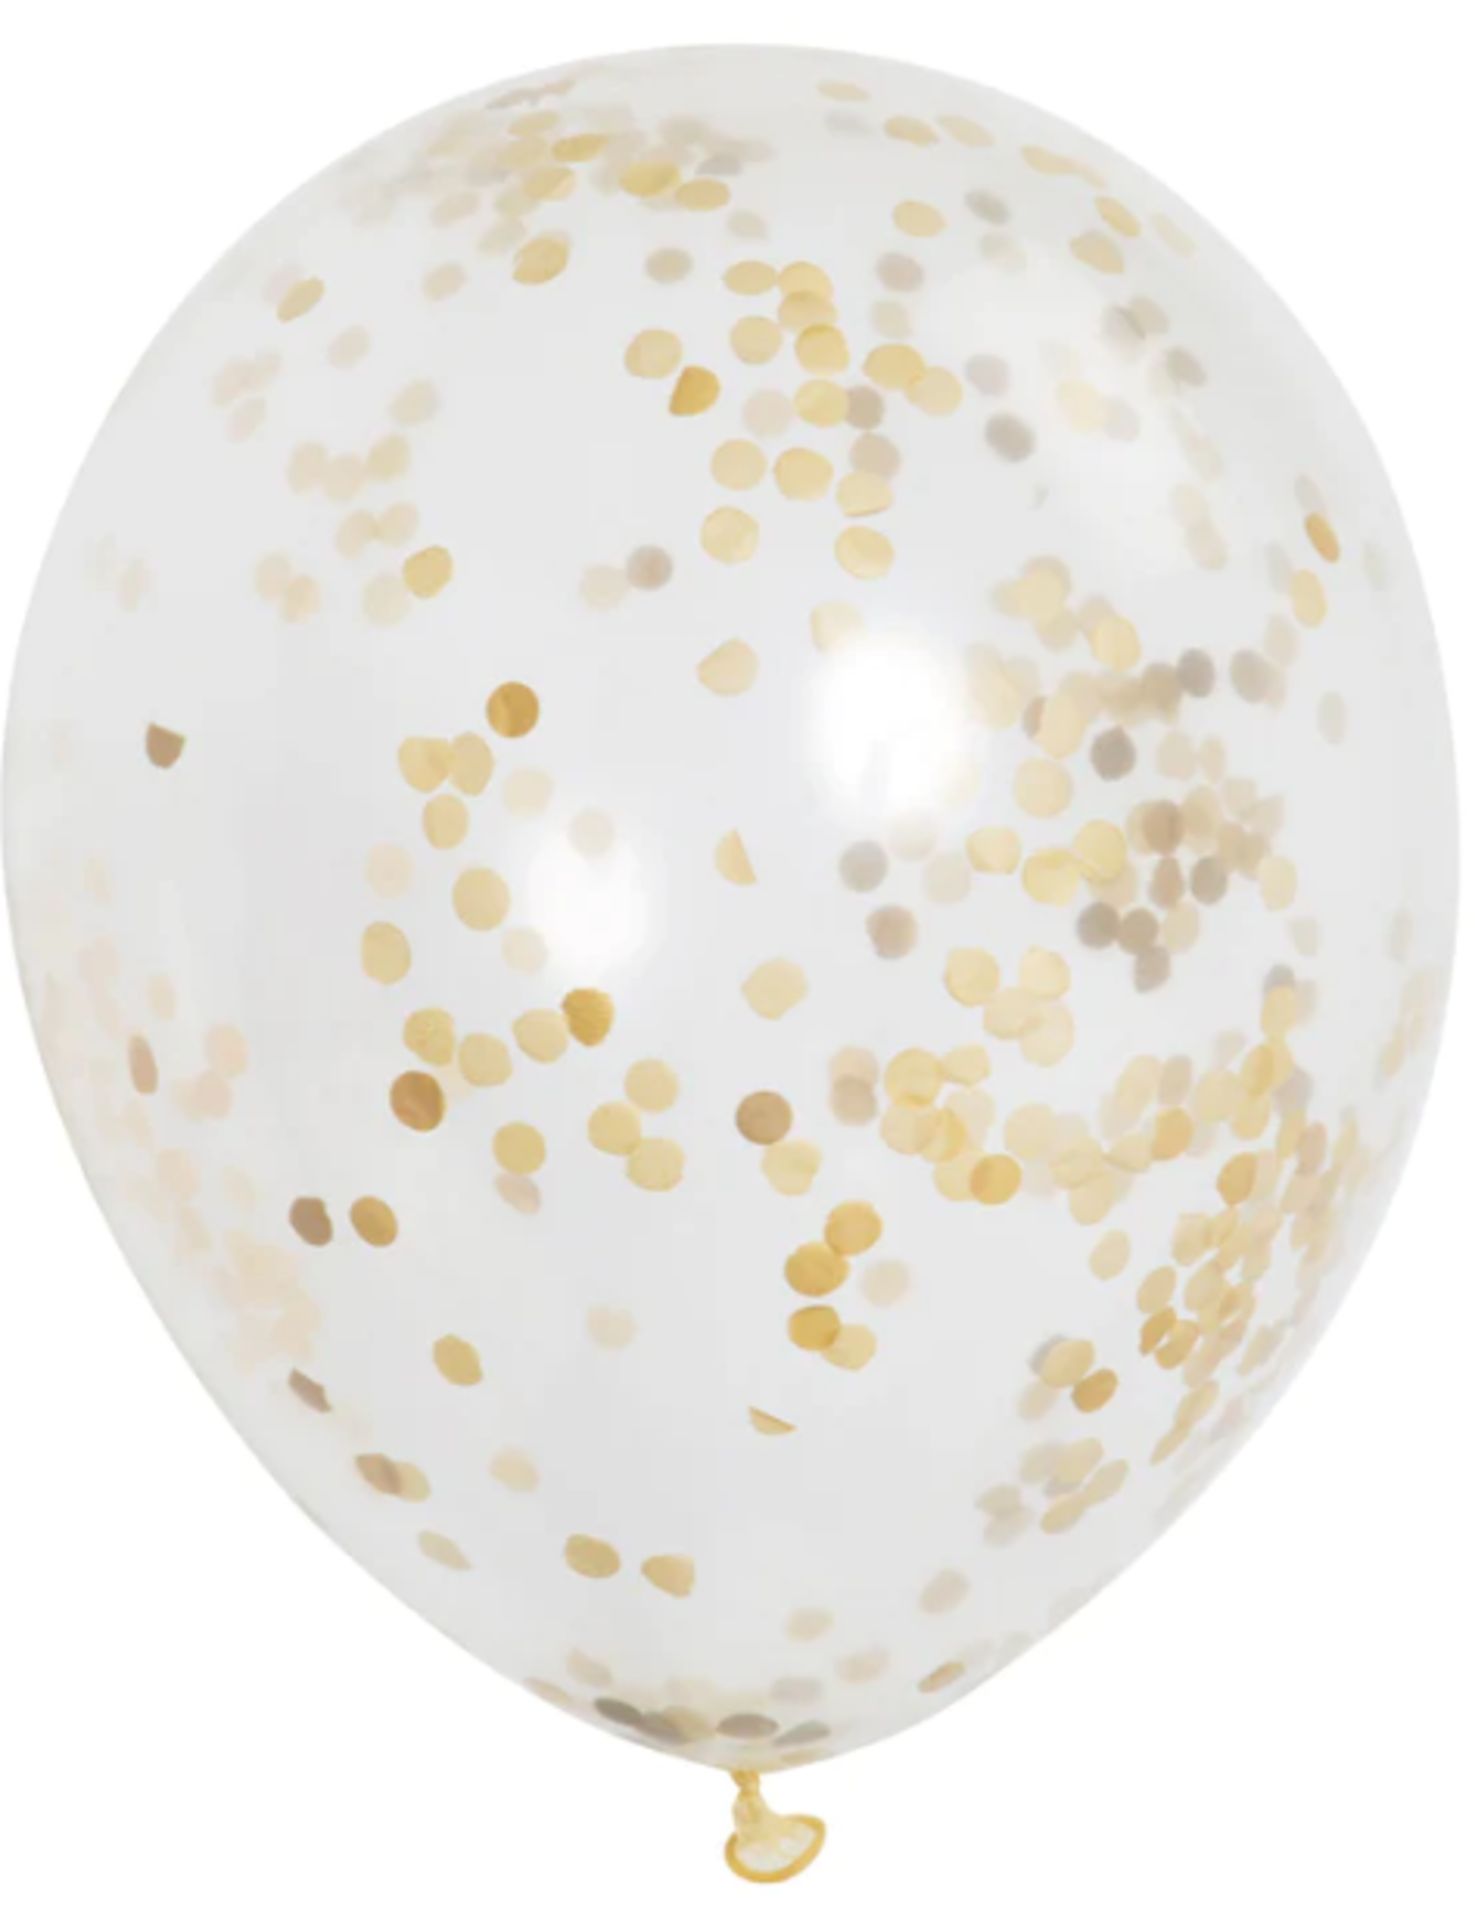 1000 PACKS OF LATEX SILVER AND GOLD CONFETTI BALLOONS, 12IN, 6CT, RRP £10,000 - Image 5 of 7